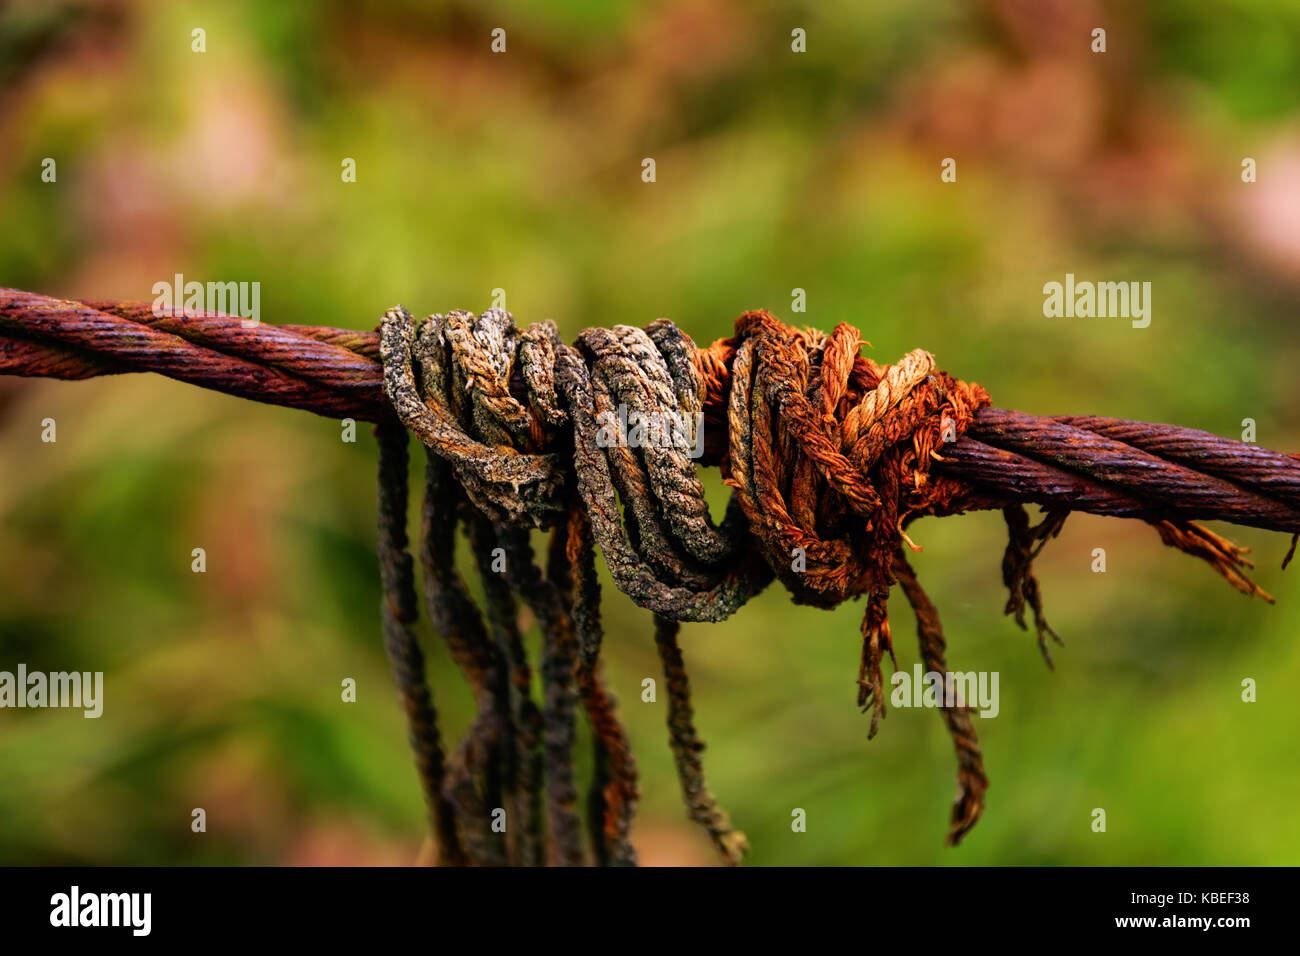 Close-Up Of Rope Wrapped Around Rusty Cable During Autumn Stock Photo